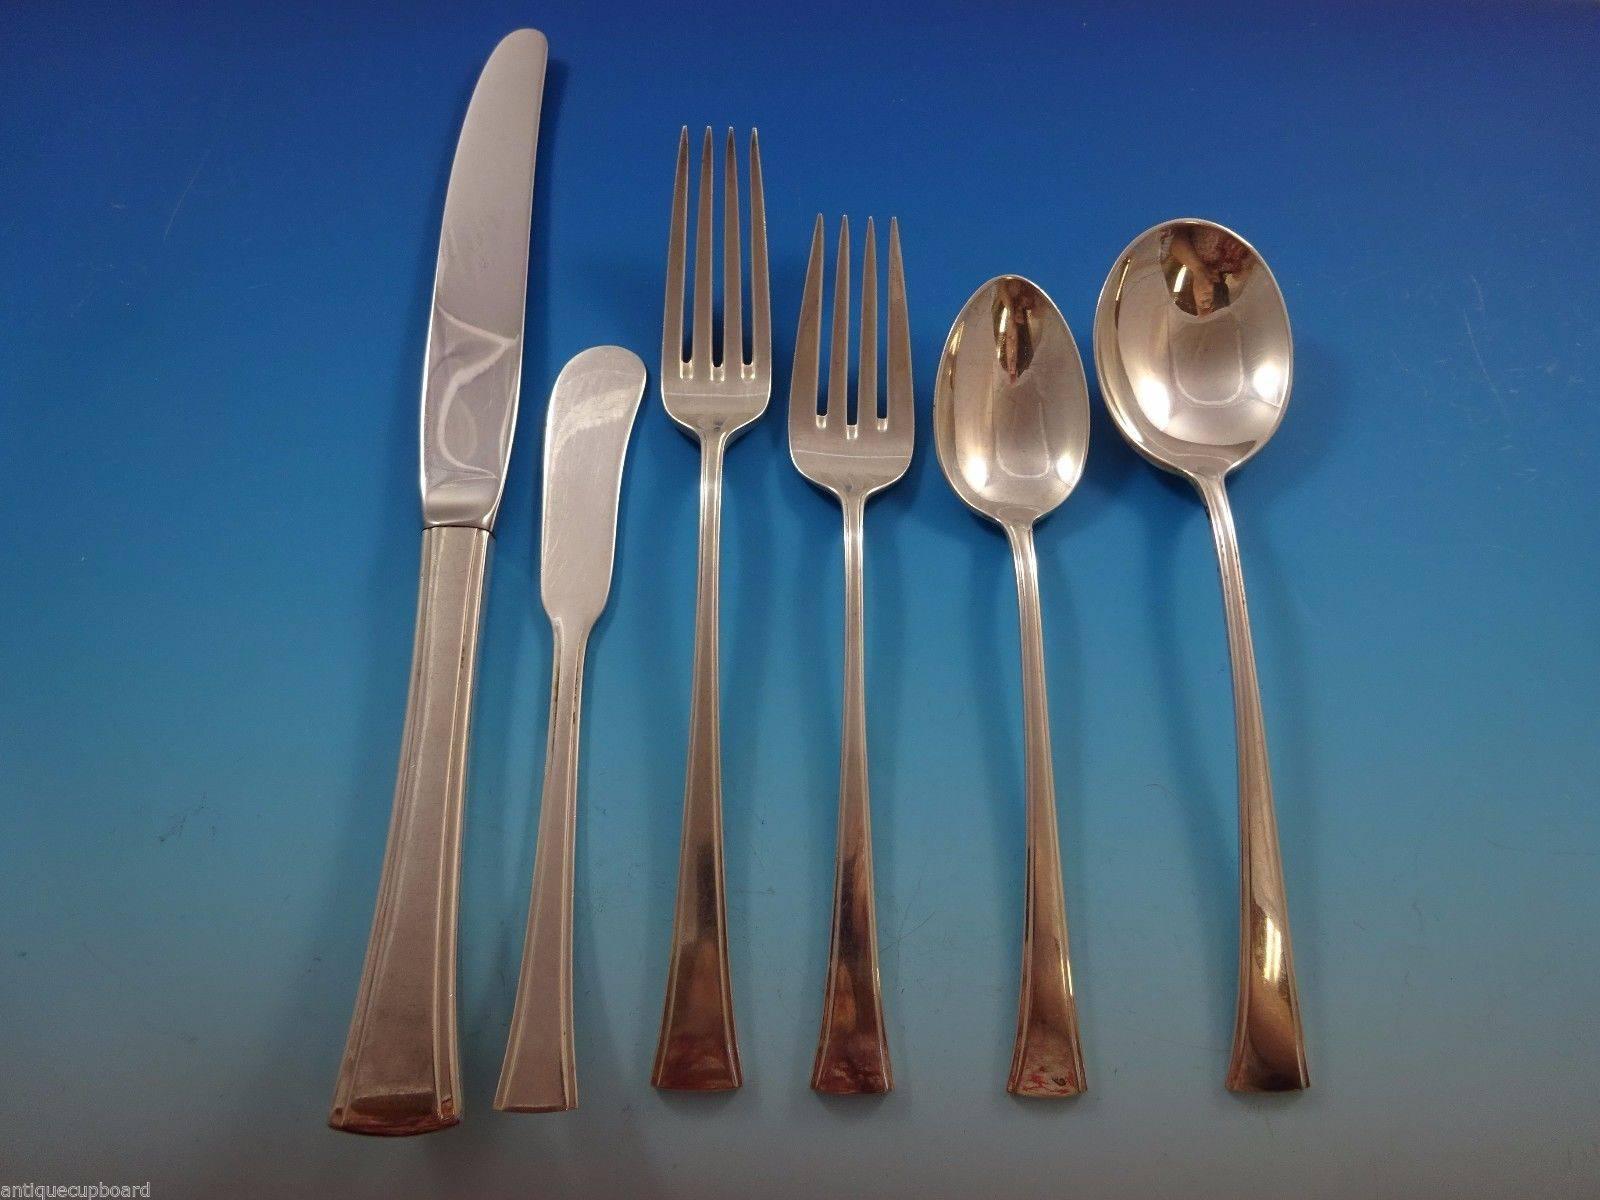 Tranquility by International sterling silver flatware set, 41 pieces set. This set has a modern look with simple lines. This set includes:

Six knives, 9 1/8